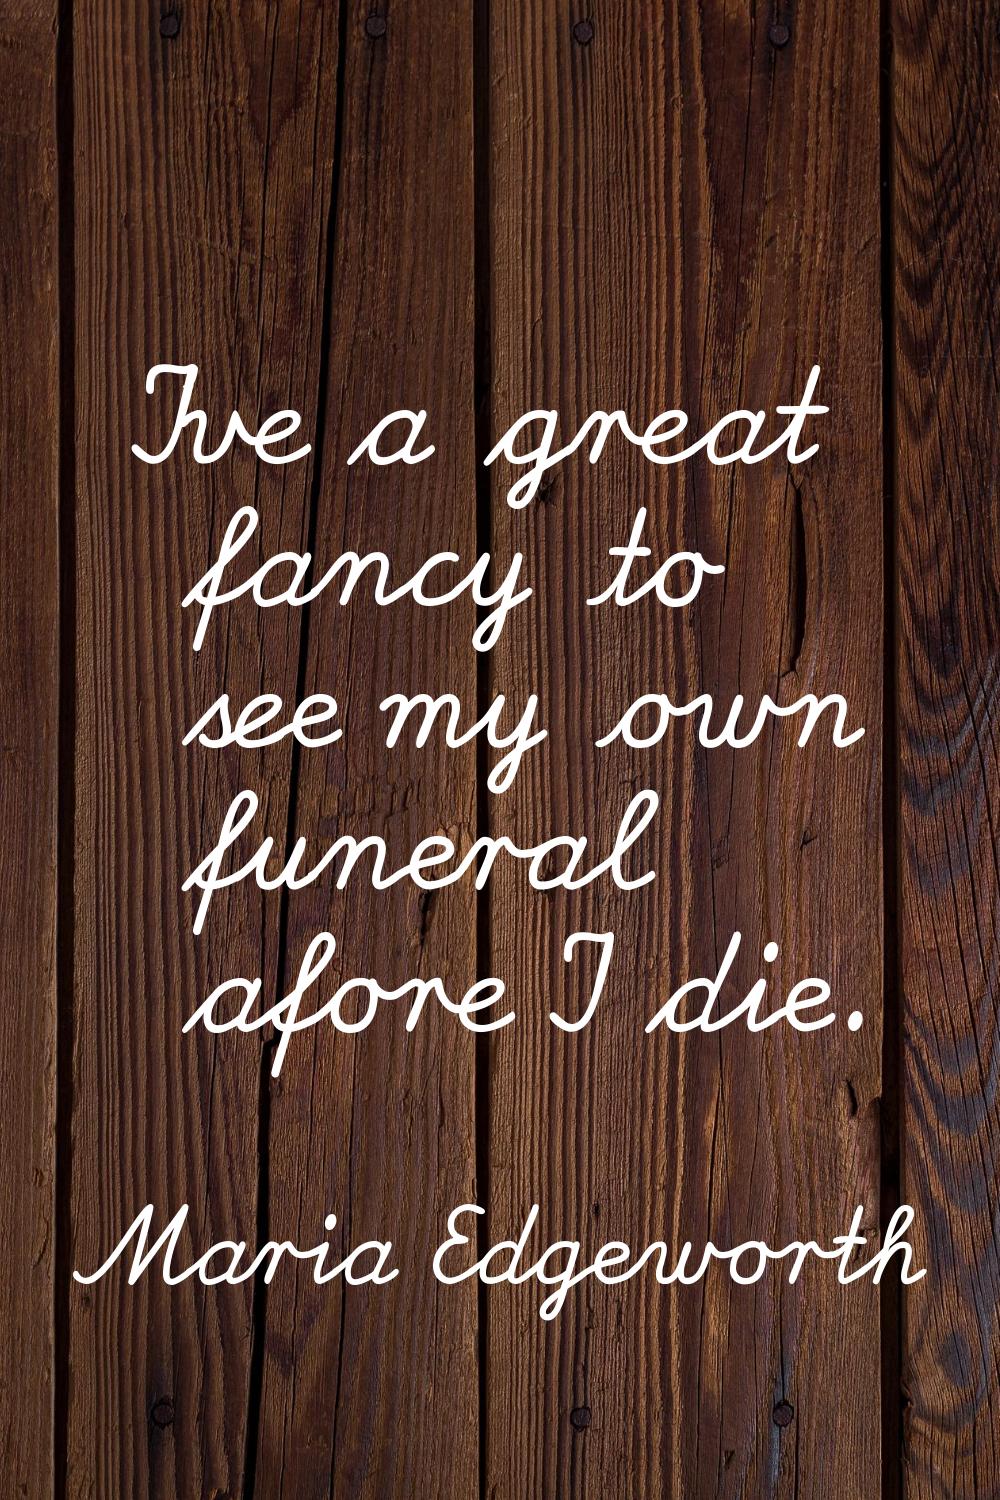 I've a great fancy to see my own funeral afore I die.